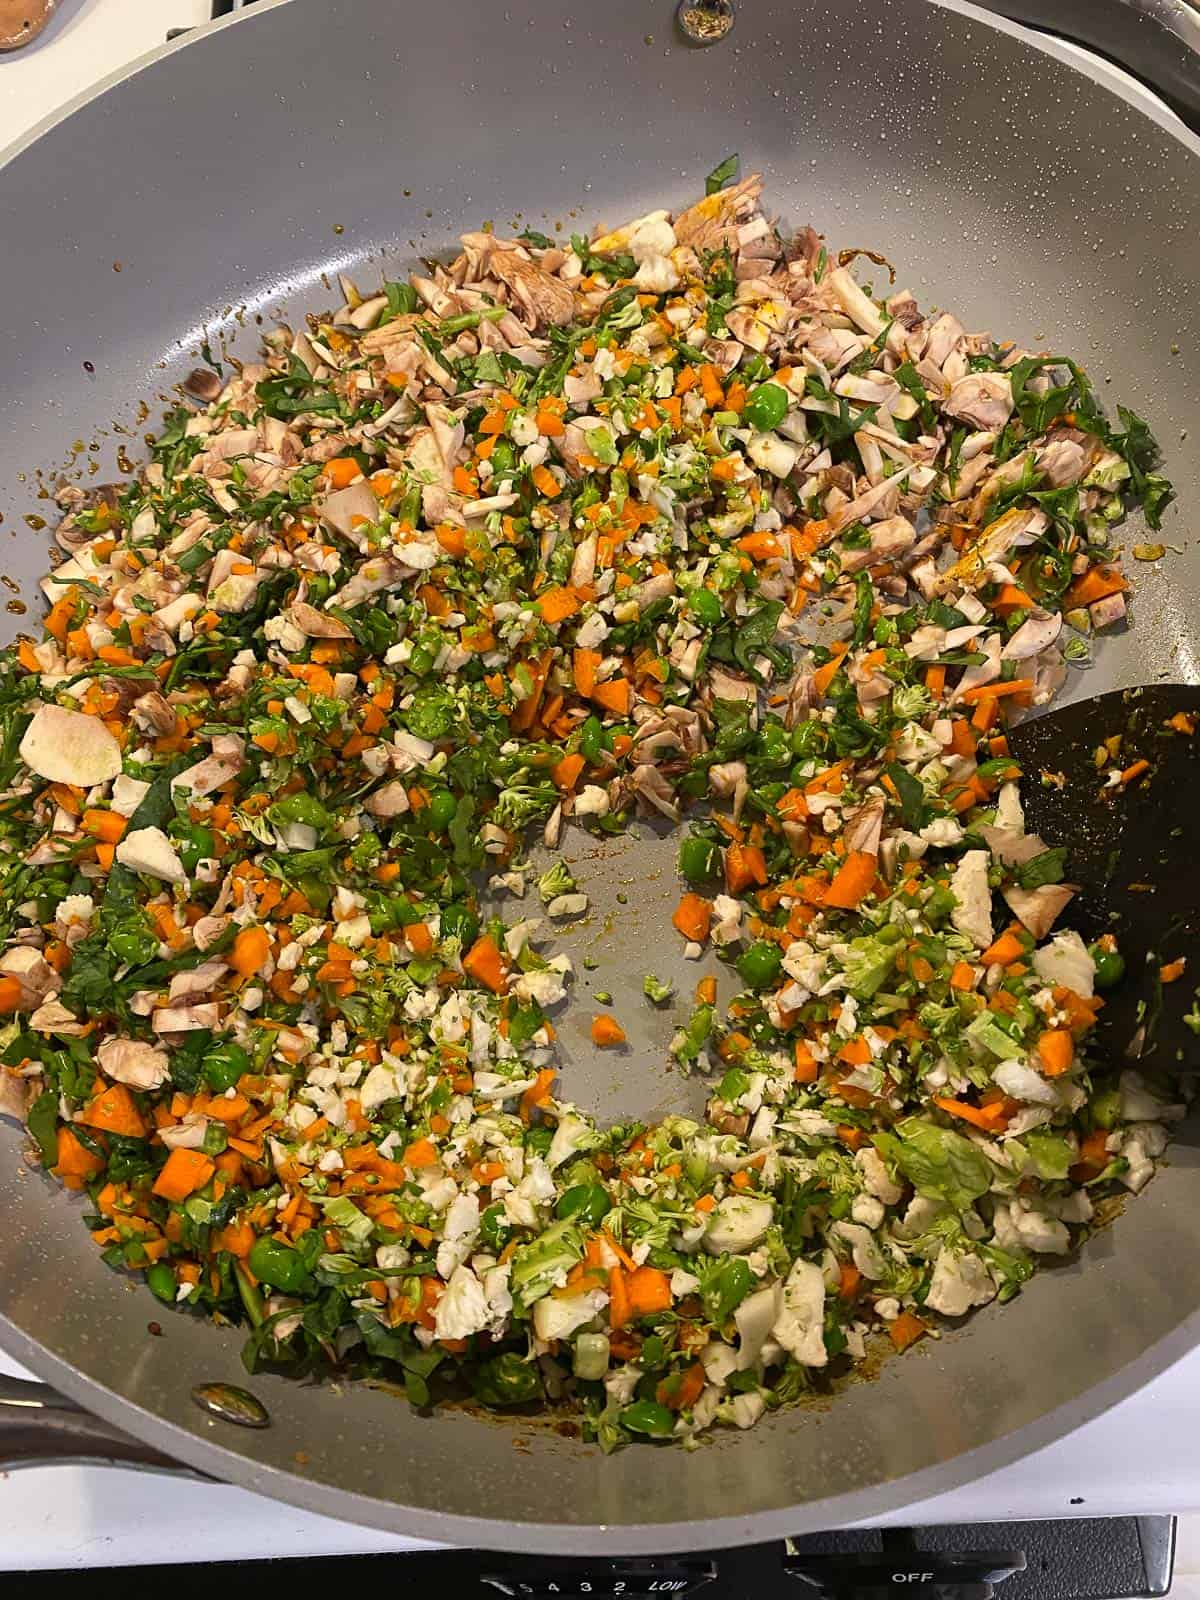 Process shot of vegetables and spices cooing in the pan